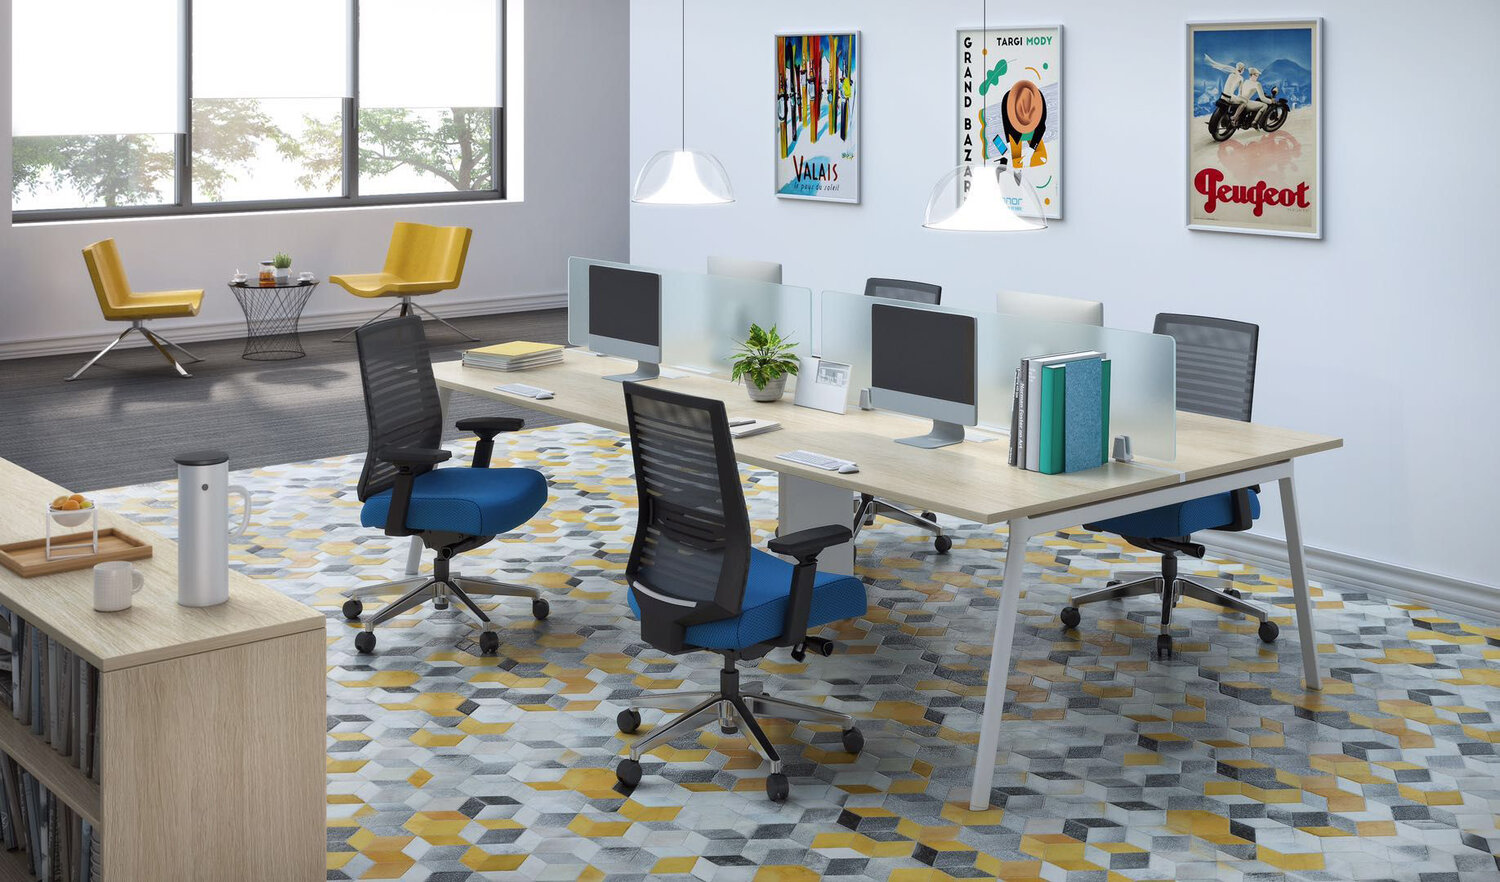  The Top 3 Budget Office Chairs for 2023 (All Tested!)